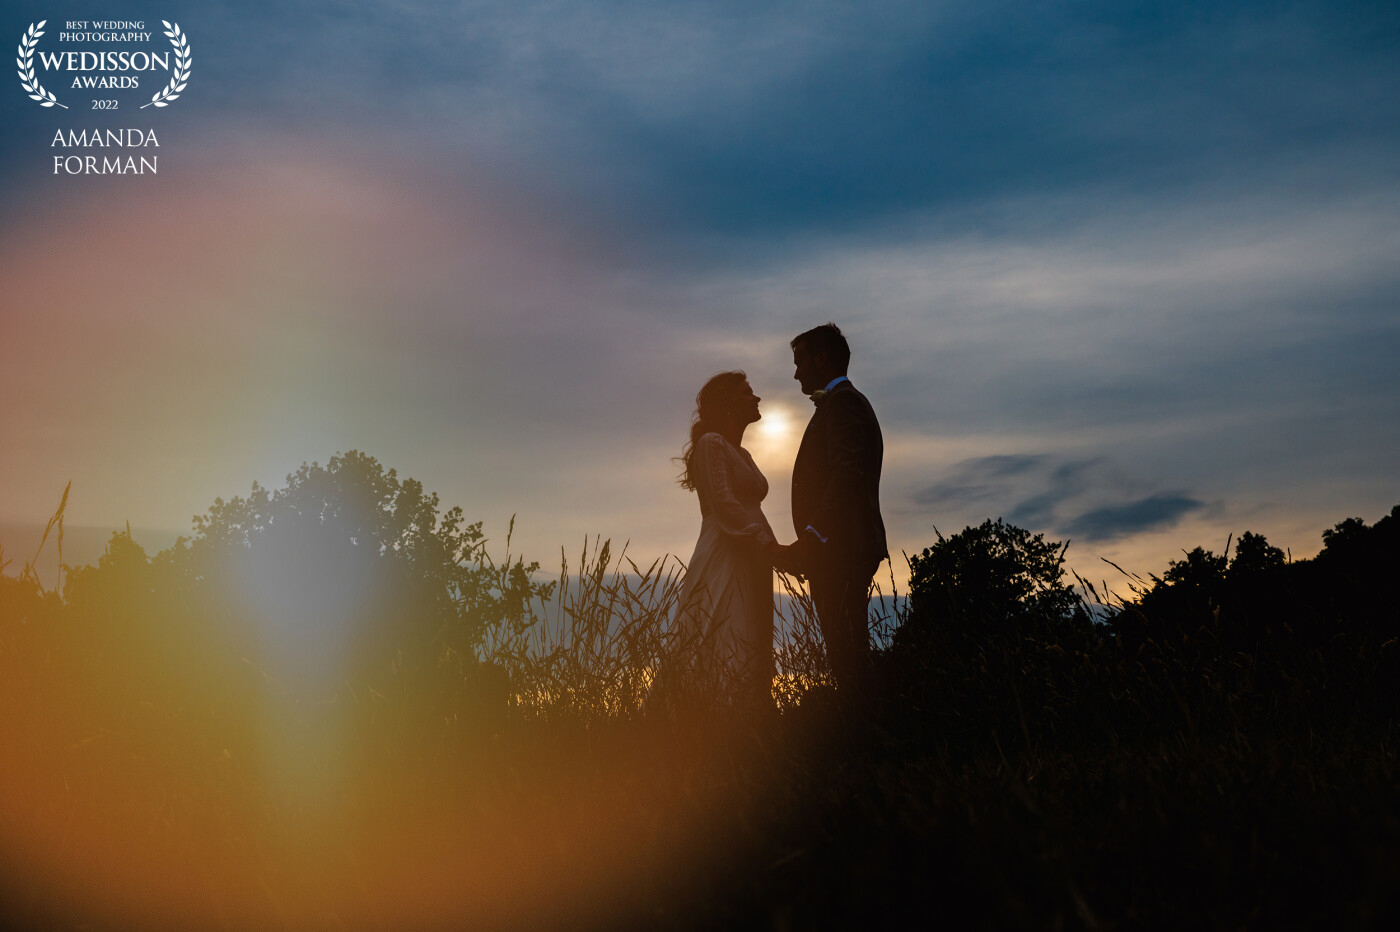 This photo was taken with only minutes to spare. The sky was so cloudy but we had a minute or two where the sun just popped between the clouds as it was setting. One of my favourite weddings of the year so I am so happy to have an award for one of their images.